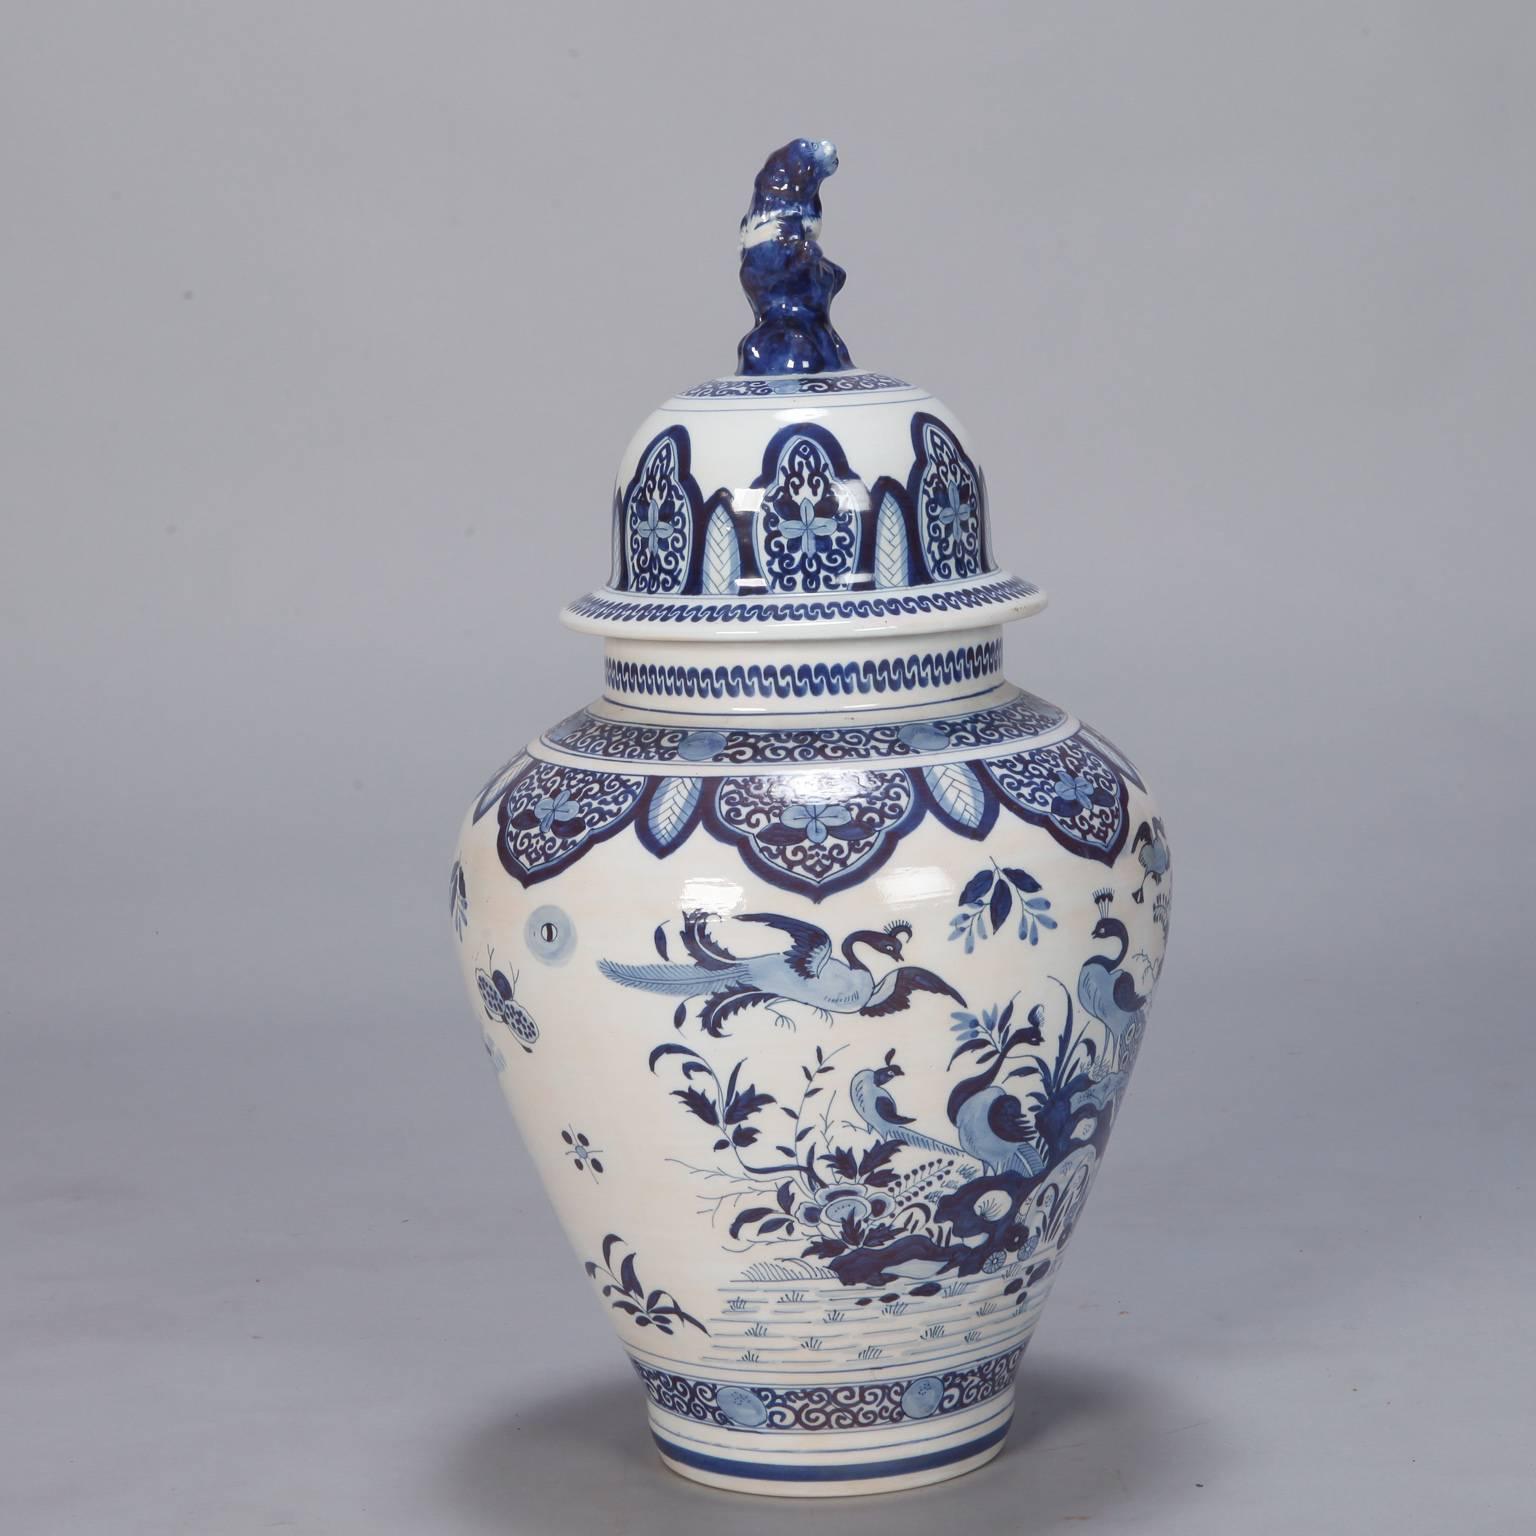 Large Dutch covered urn or vase with a Chinese style blue and white decorative glaze and sculpted foo dog handle on the lid, circa 1900.